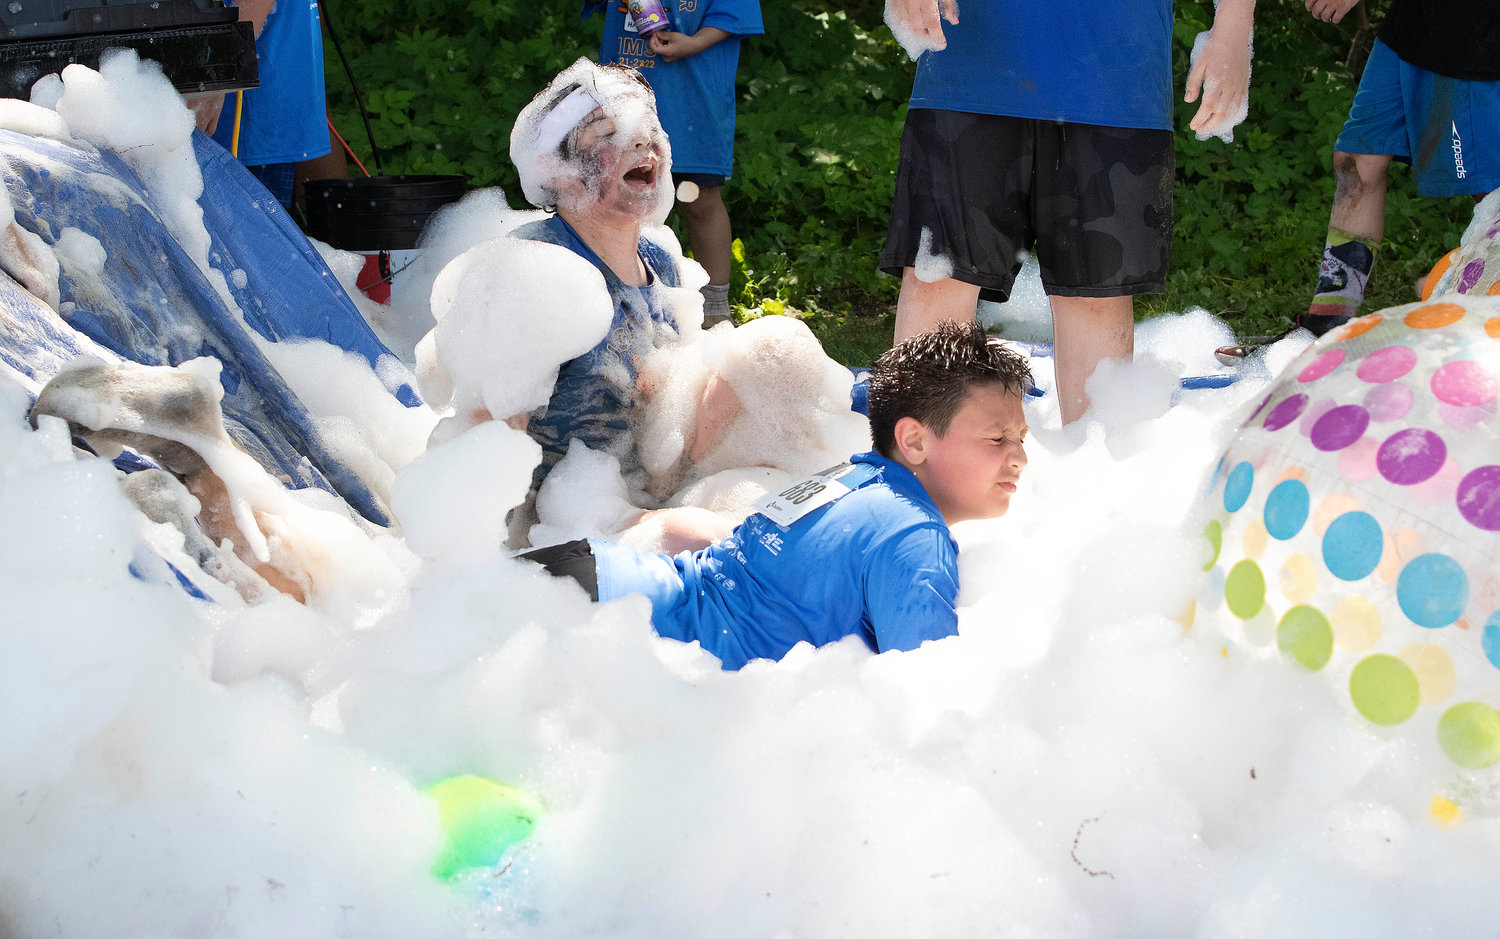 After running through some mud, competitors had the opportunity to clean themselves off in an over-sized bubble obstacle.